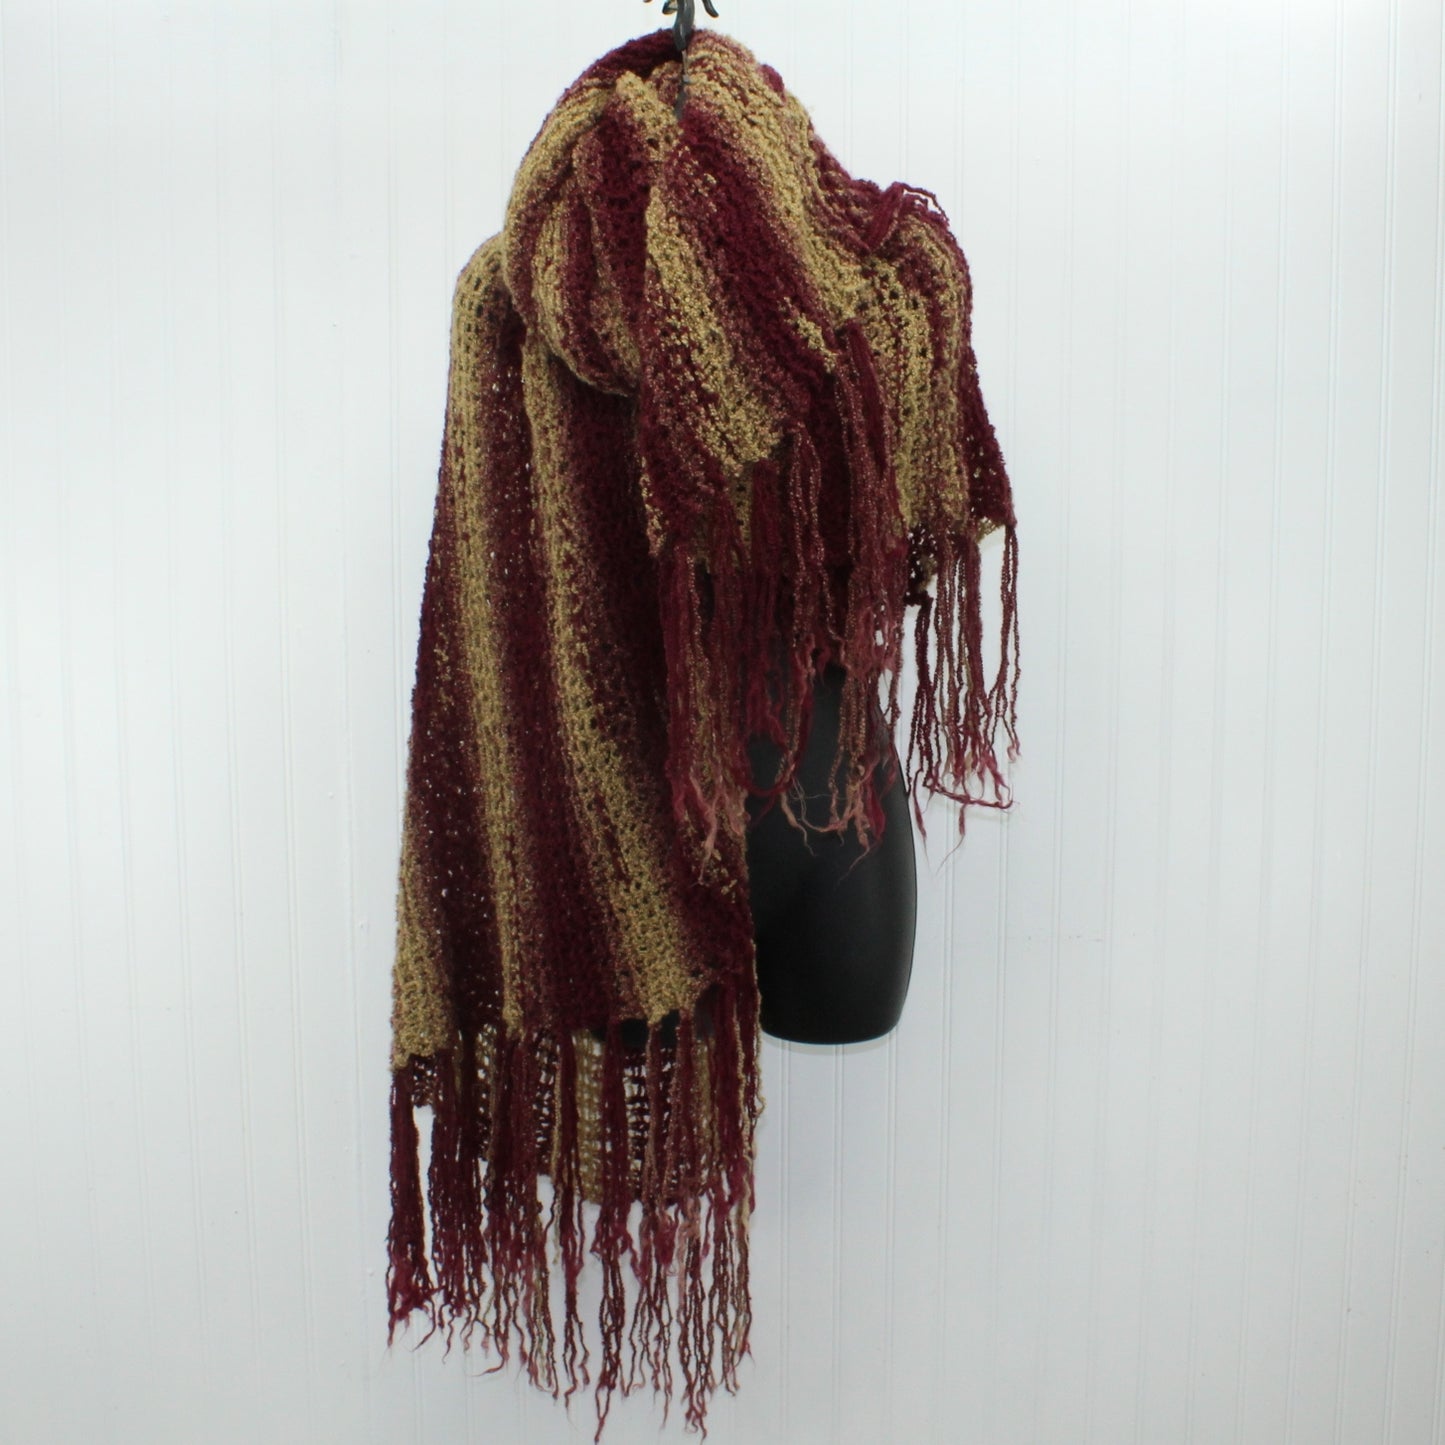 Hand Made Chenille Shawl Scarf Long Lacy Suit Coat Wrap Burgundy Camel Fringe wrap all ways